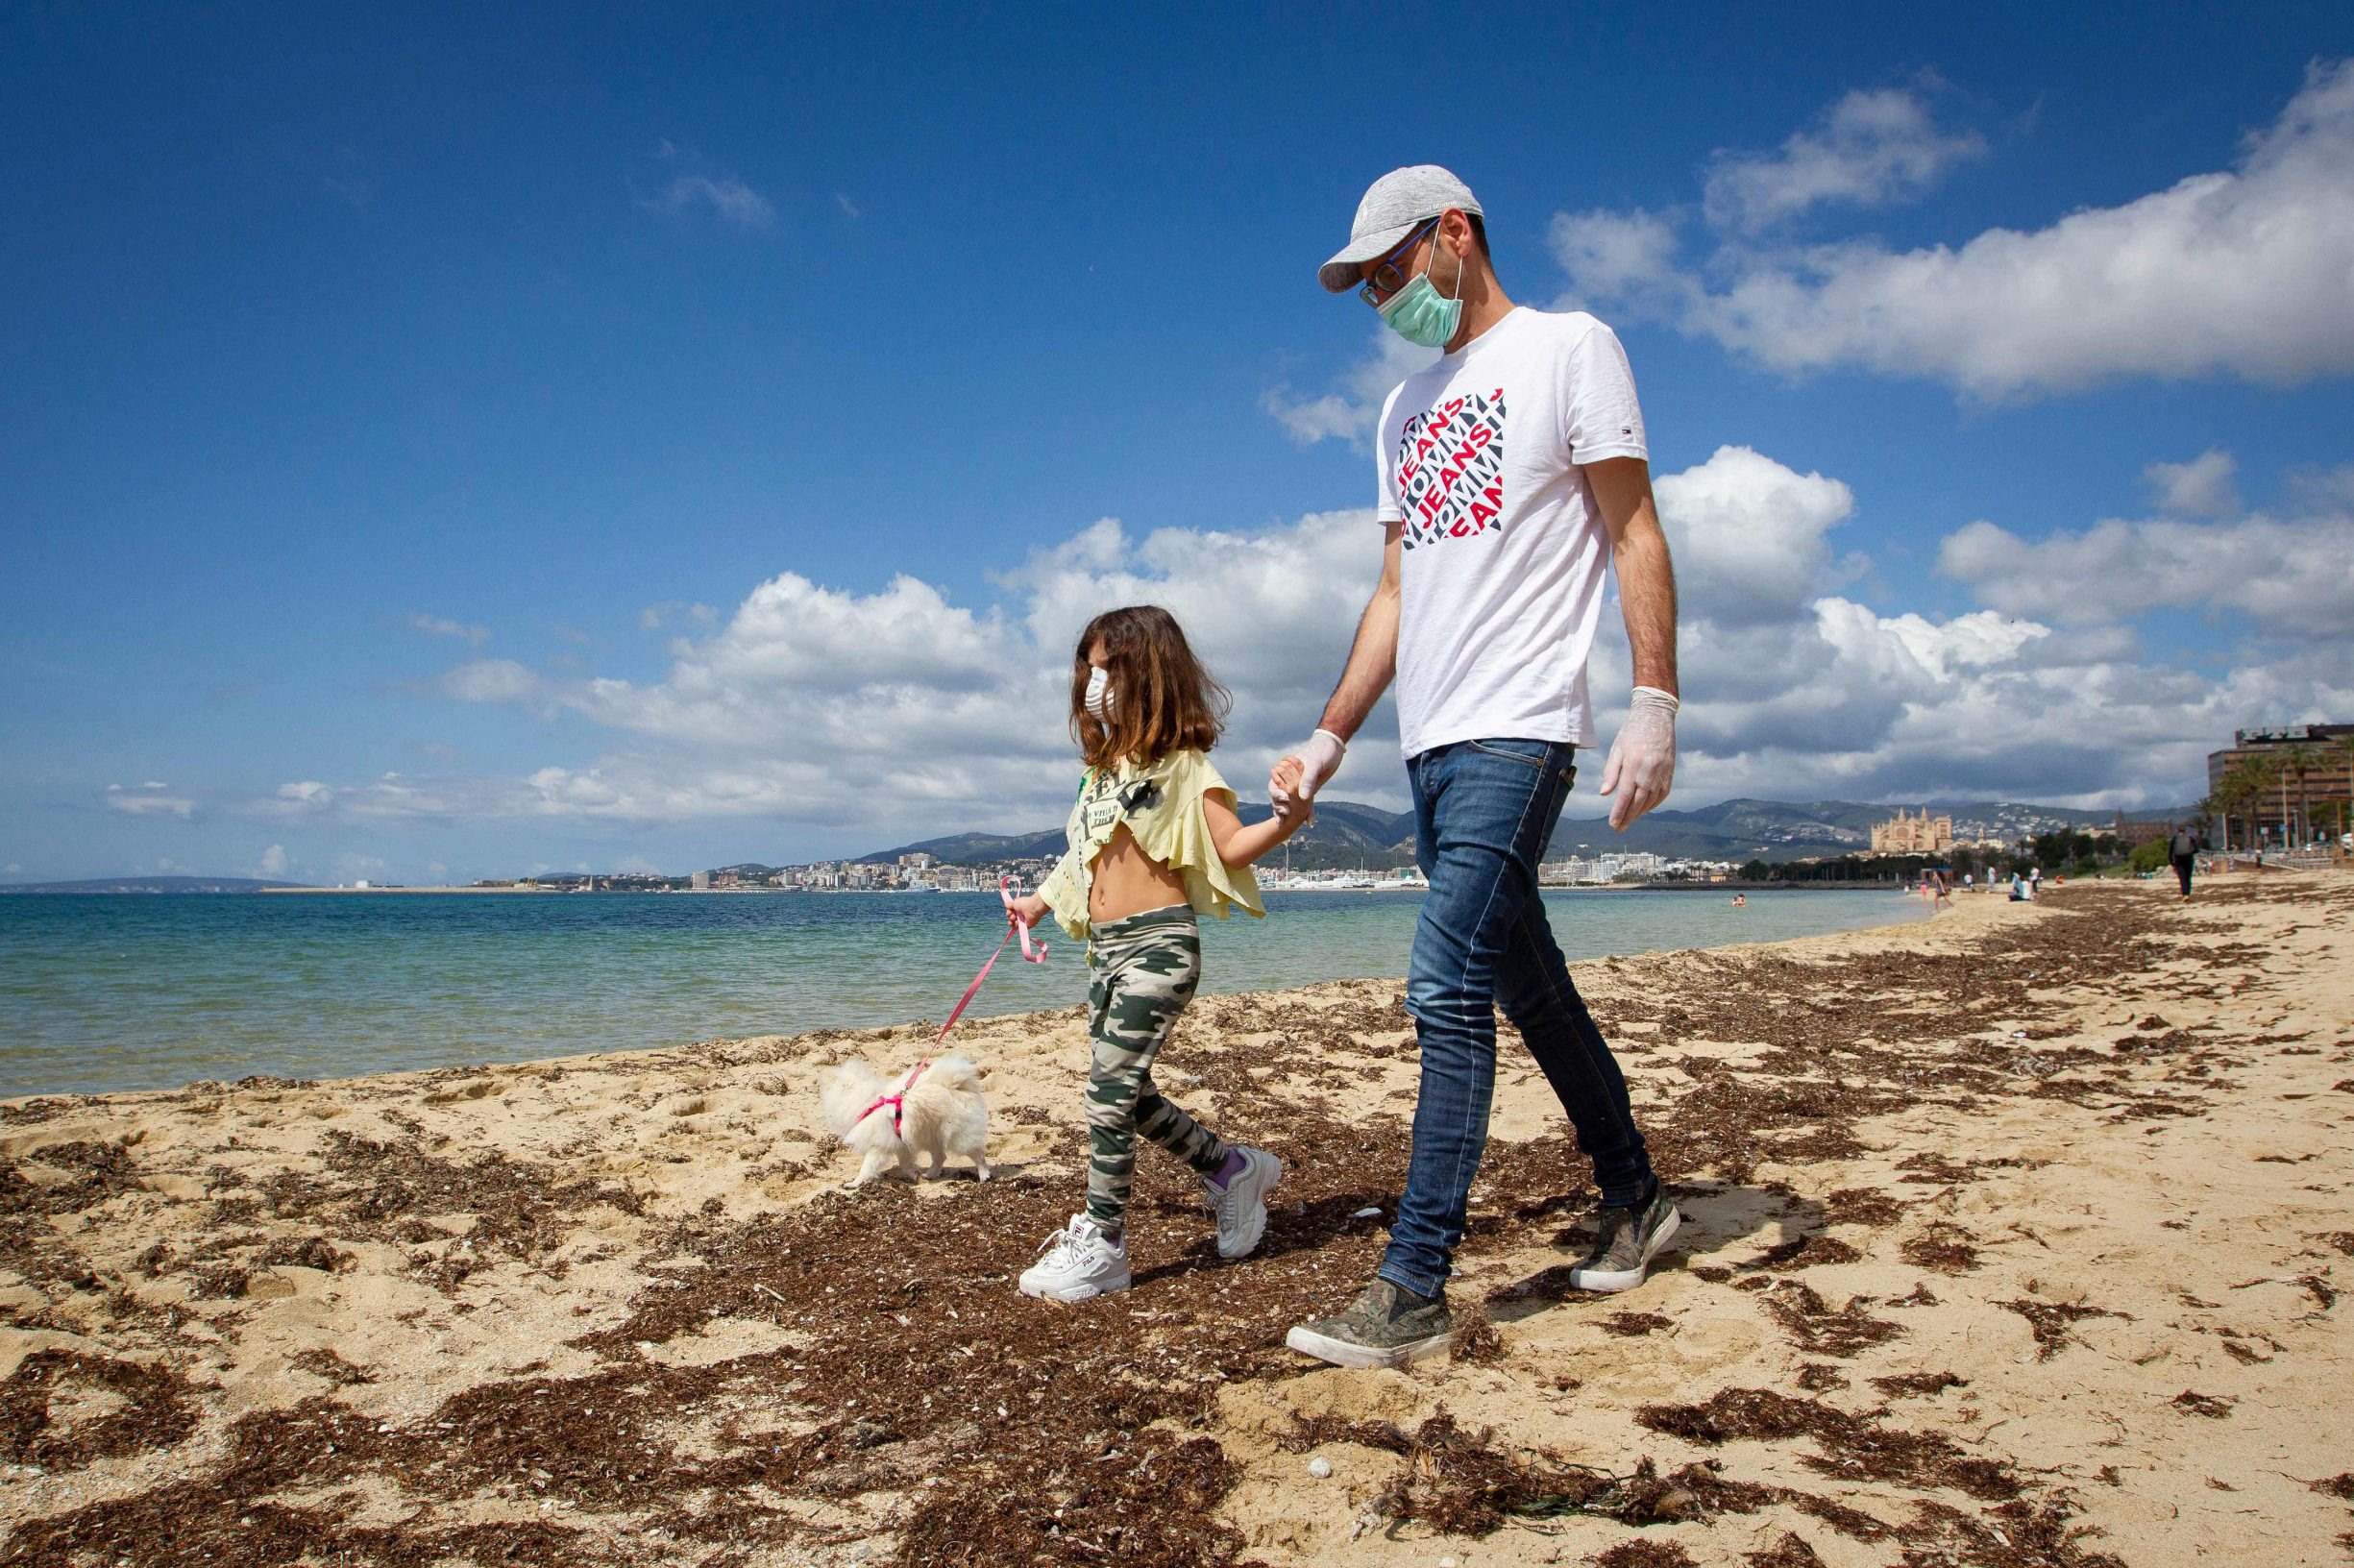 A girls walks her dog with her father on Can Pere Antoni Beach in Palma de Mallorca, on April 26, 2020 during a national lockdown to prevent the spread of the COVID-19 disease. - After six weeks stuck at home, Spain's children were being allowed out today to run, play or go for a walk as the government eased one of the world's toughest coronavirus lockdowns. Spain is one of the hardest hit countries, with a death toll running a more than 23,000 to put it behind only the United States and Italy despite stringent restrictions imposed from March 14, including keeping all children indoors. Today, with their scooters, tricycles or in prams, the children accompanied by their parents came out onto largely deserted streets. (Photo by JAIME REINA / AFP)